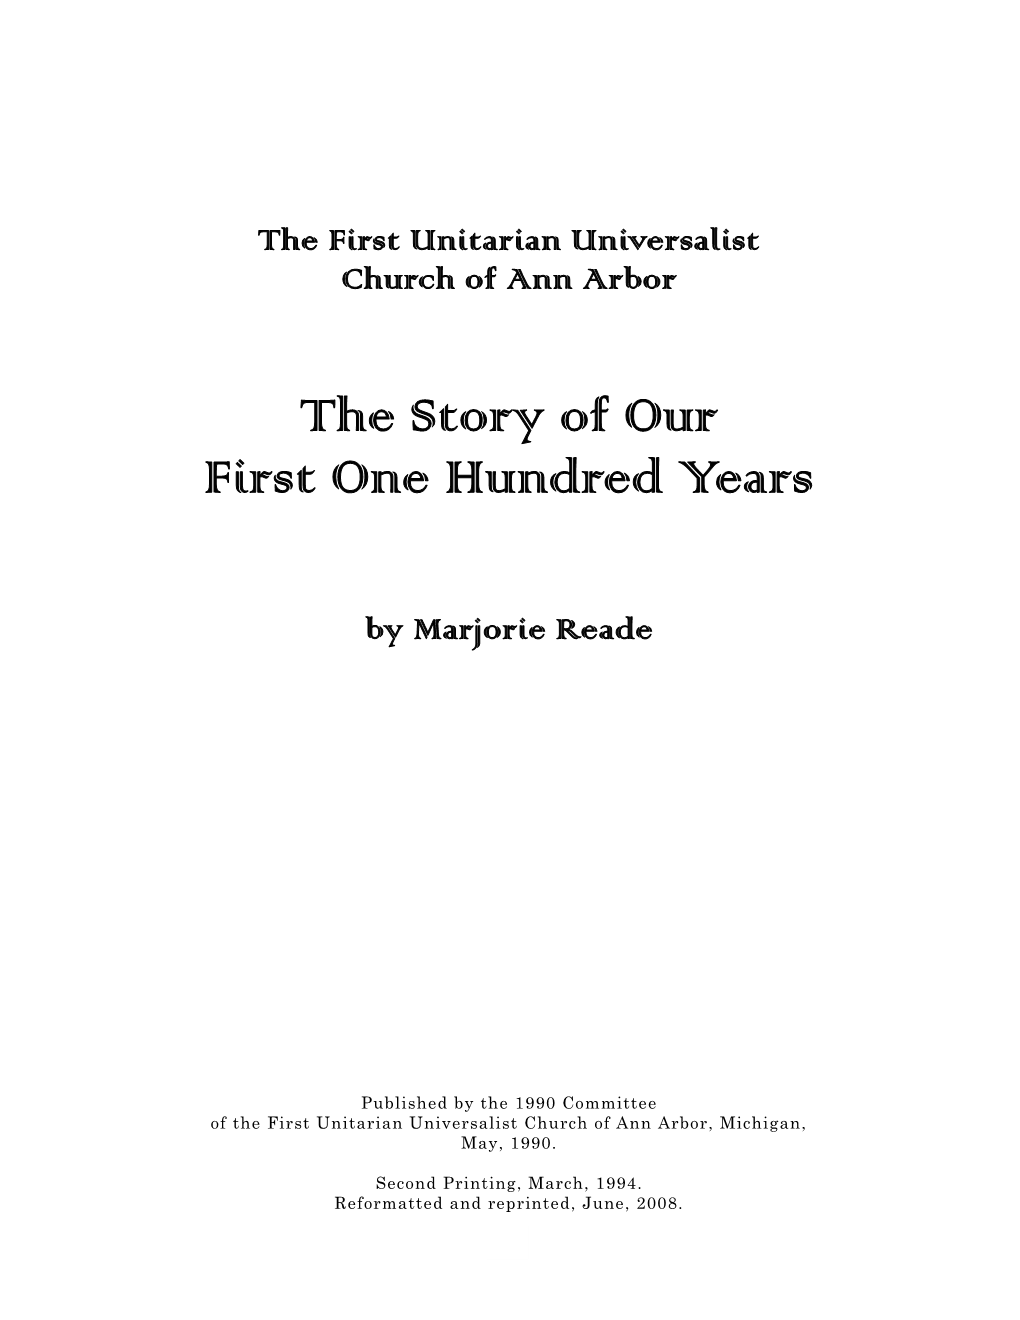 The Story of Our First 100 Years